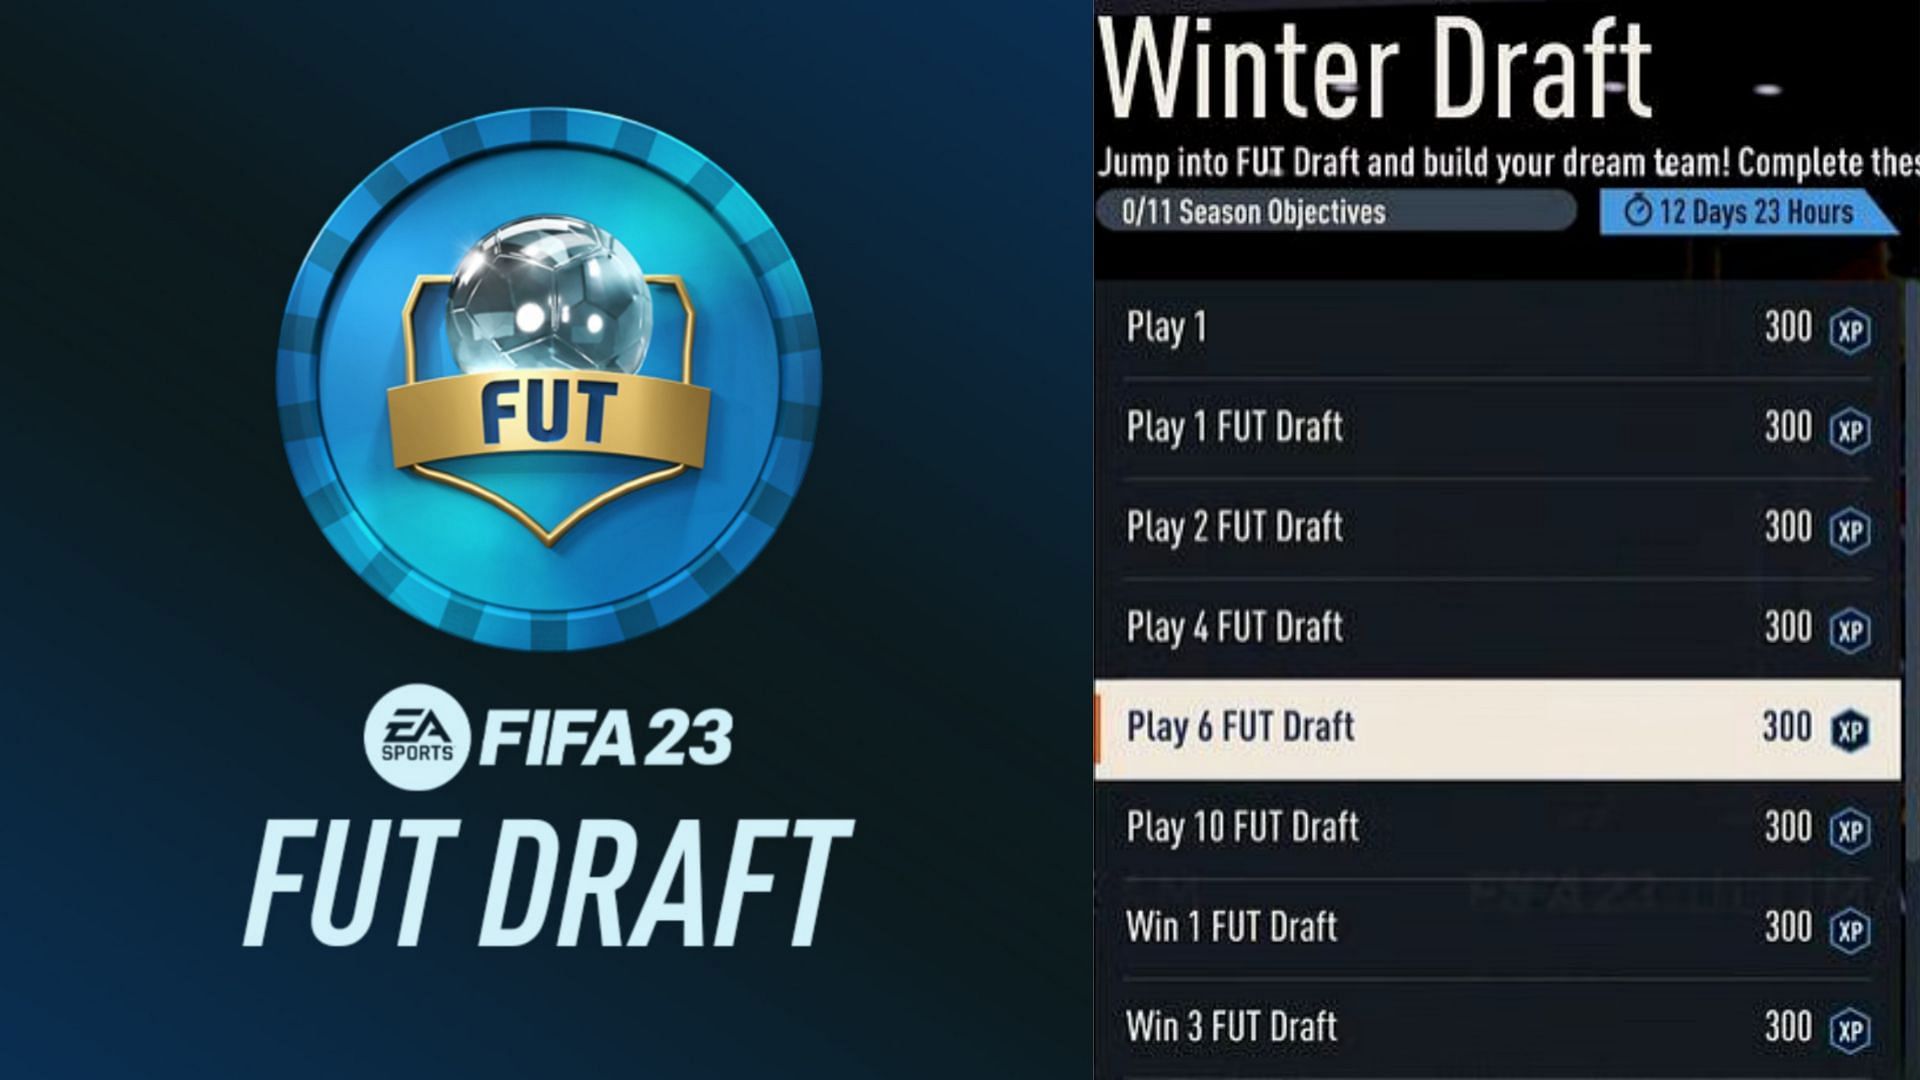 The new set of objectives will allow players to get some amazing rewards in the game (Images via EA Sports)